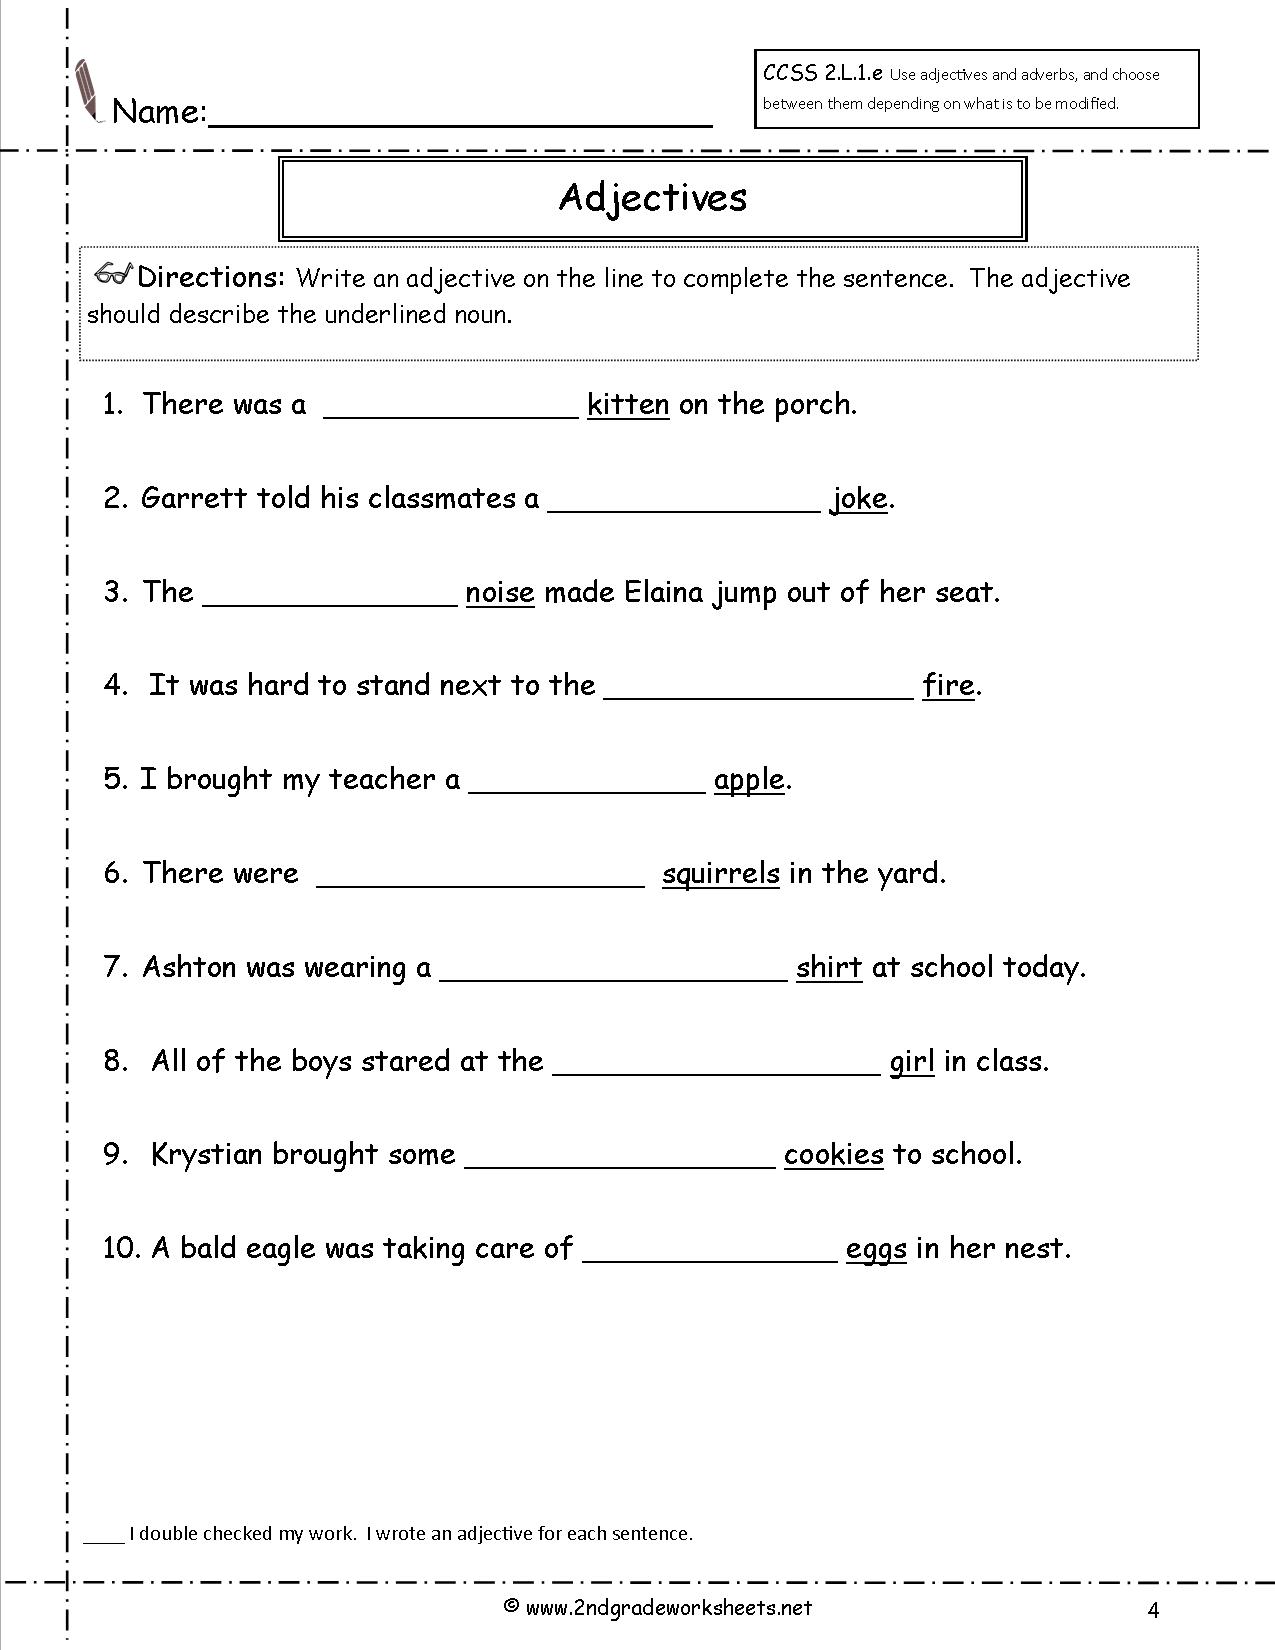 nouns-adjectives-worksheets-for-grade-3-3-your-home-teacher